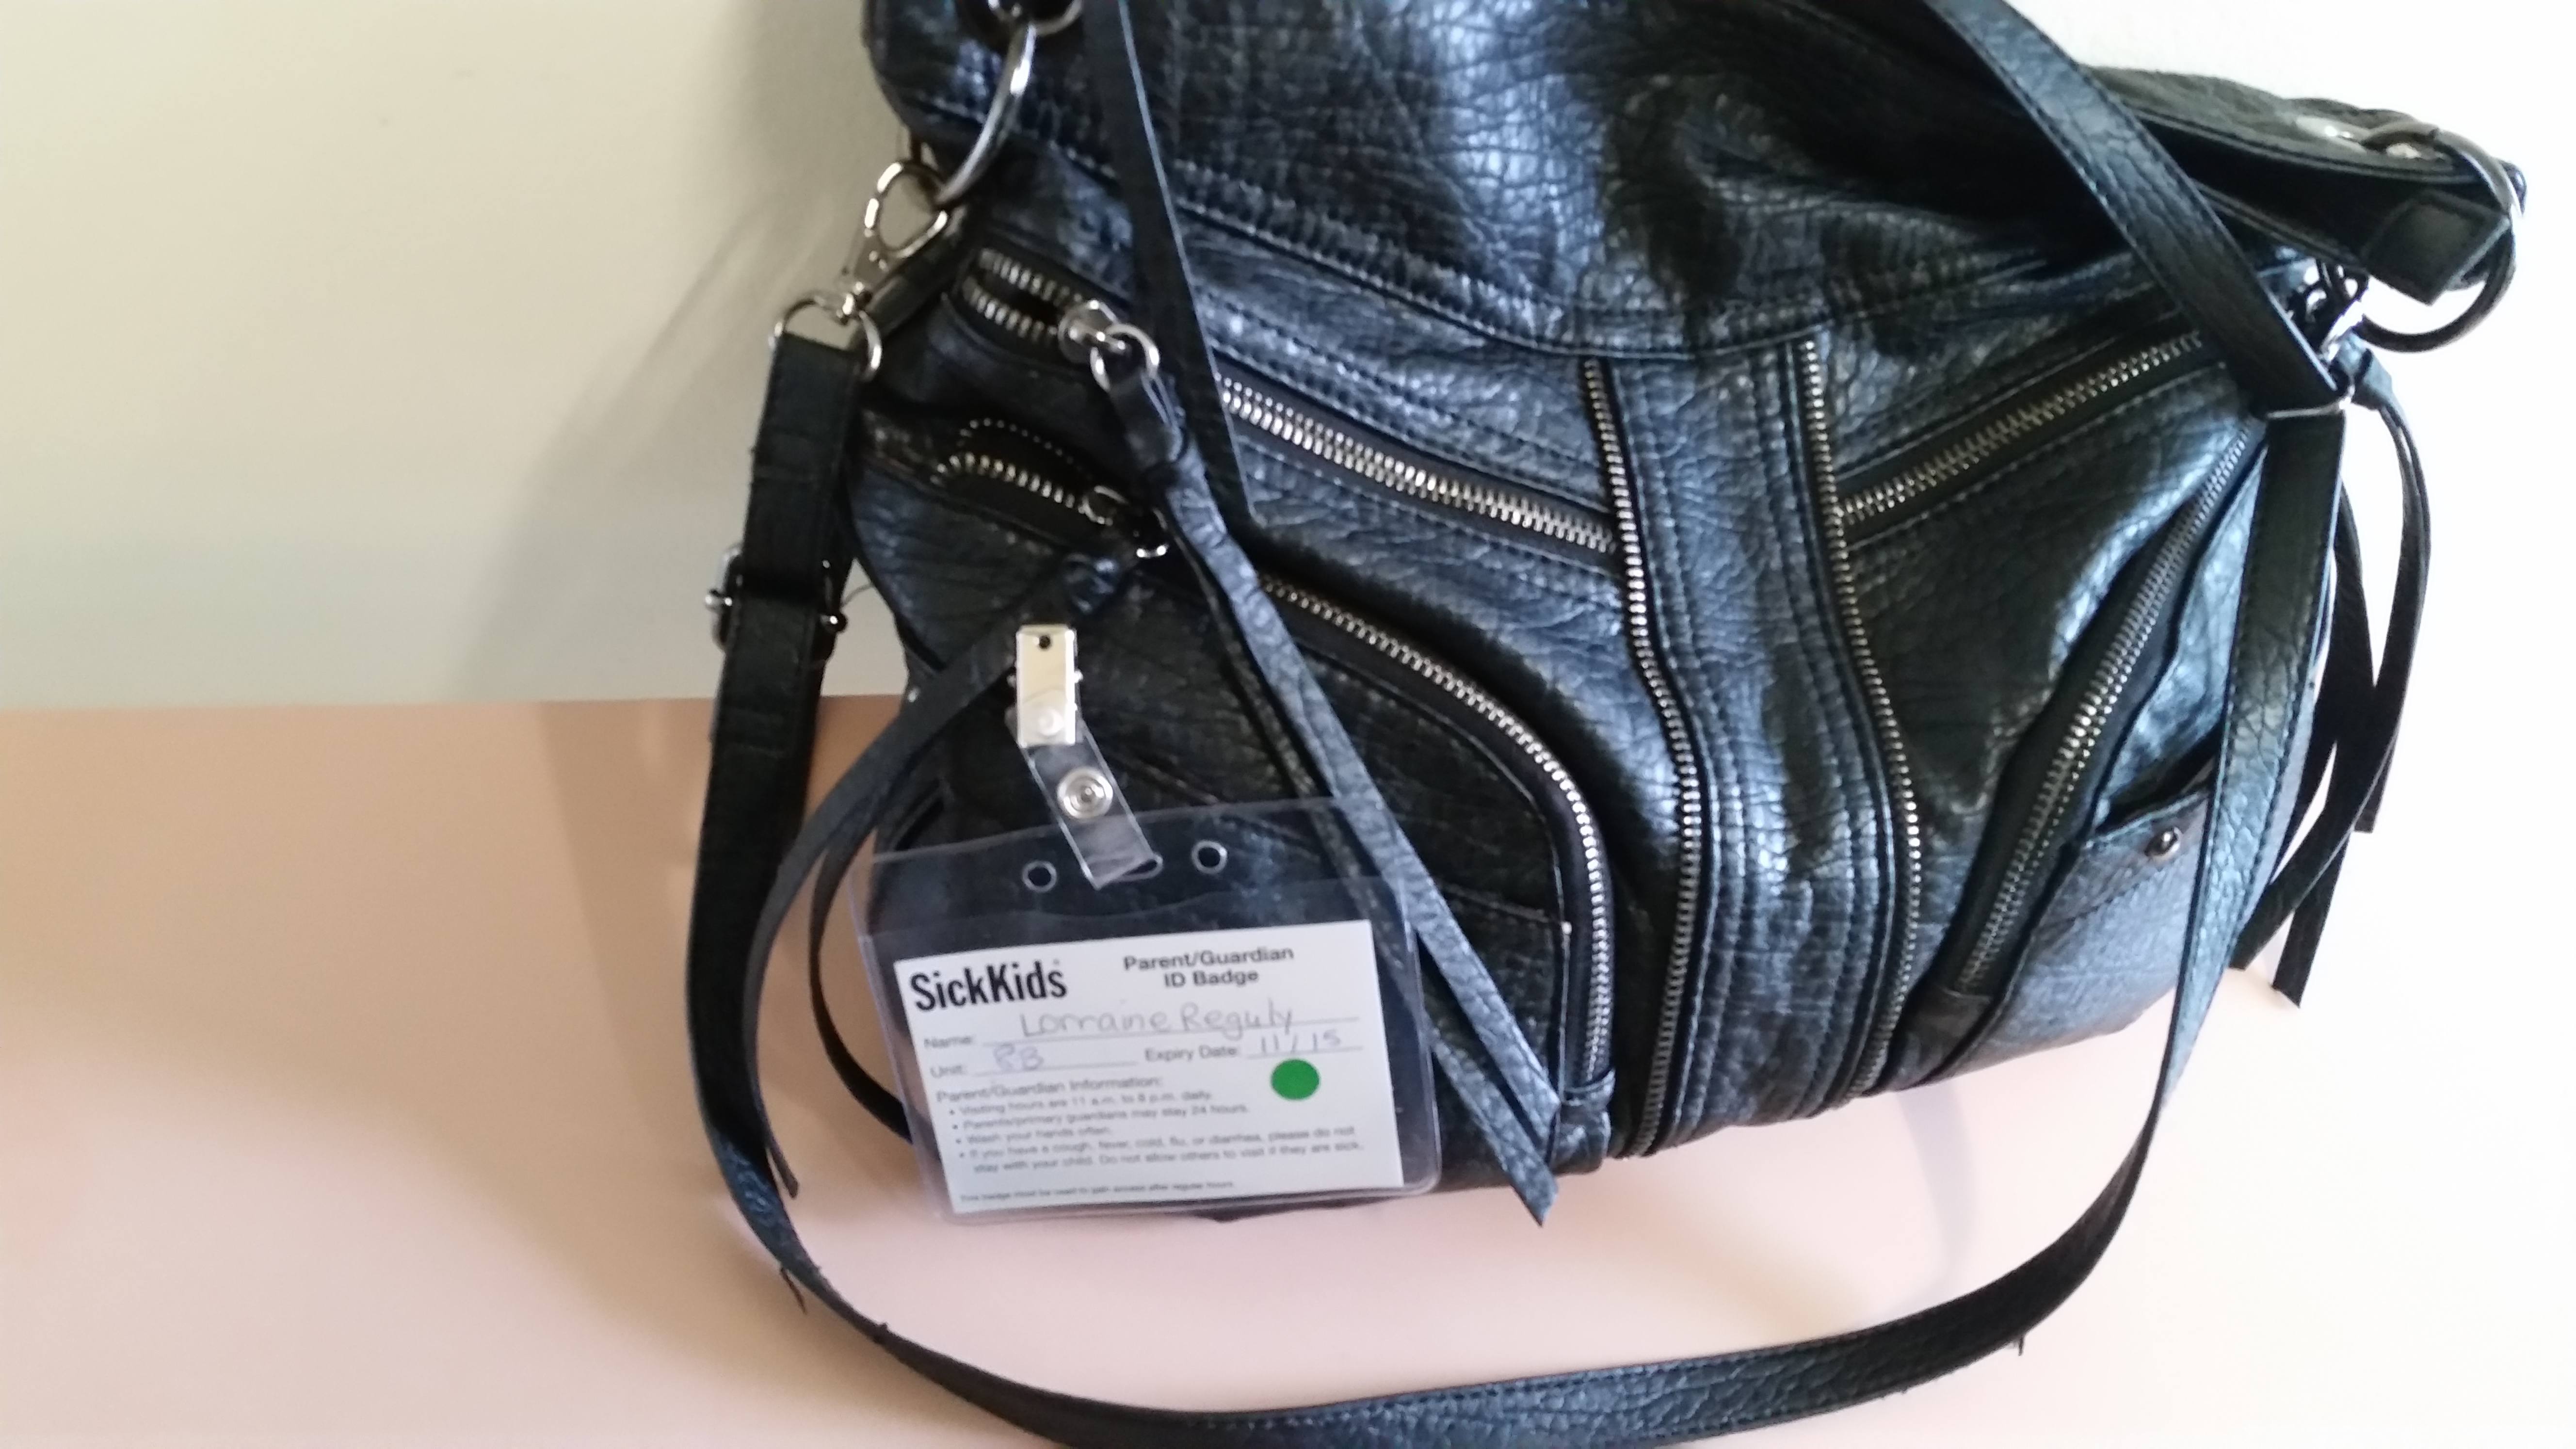 My visitor ID badge attached to my purse